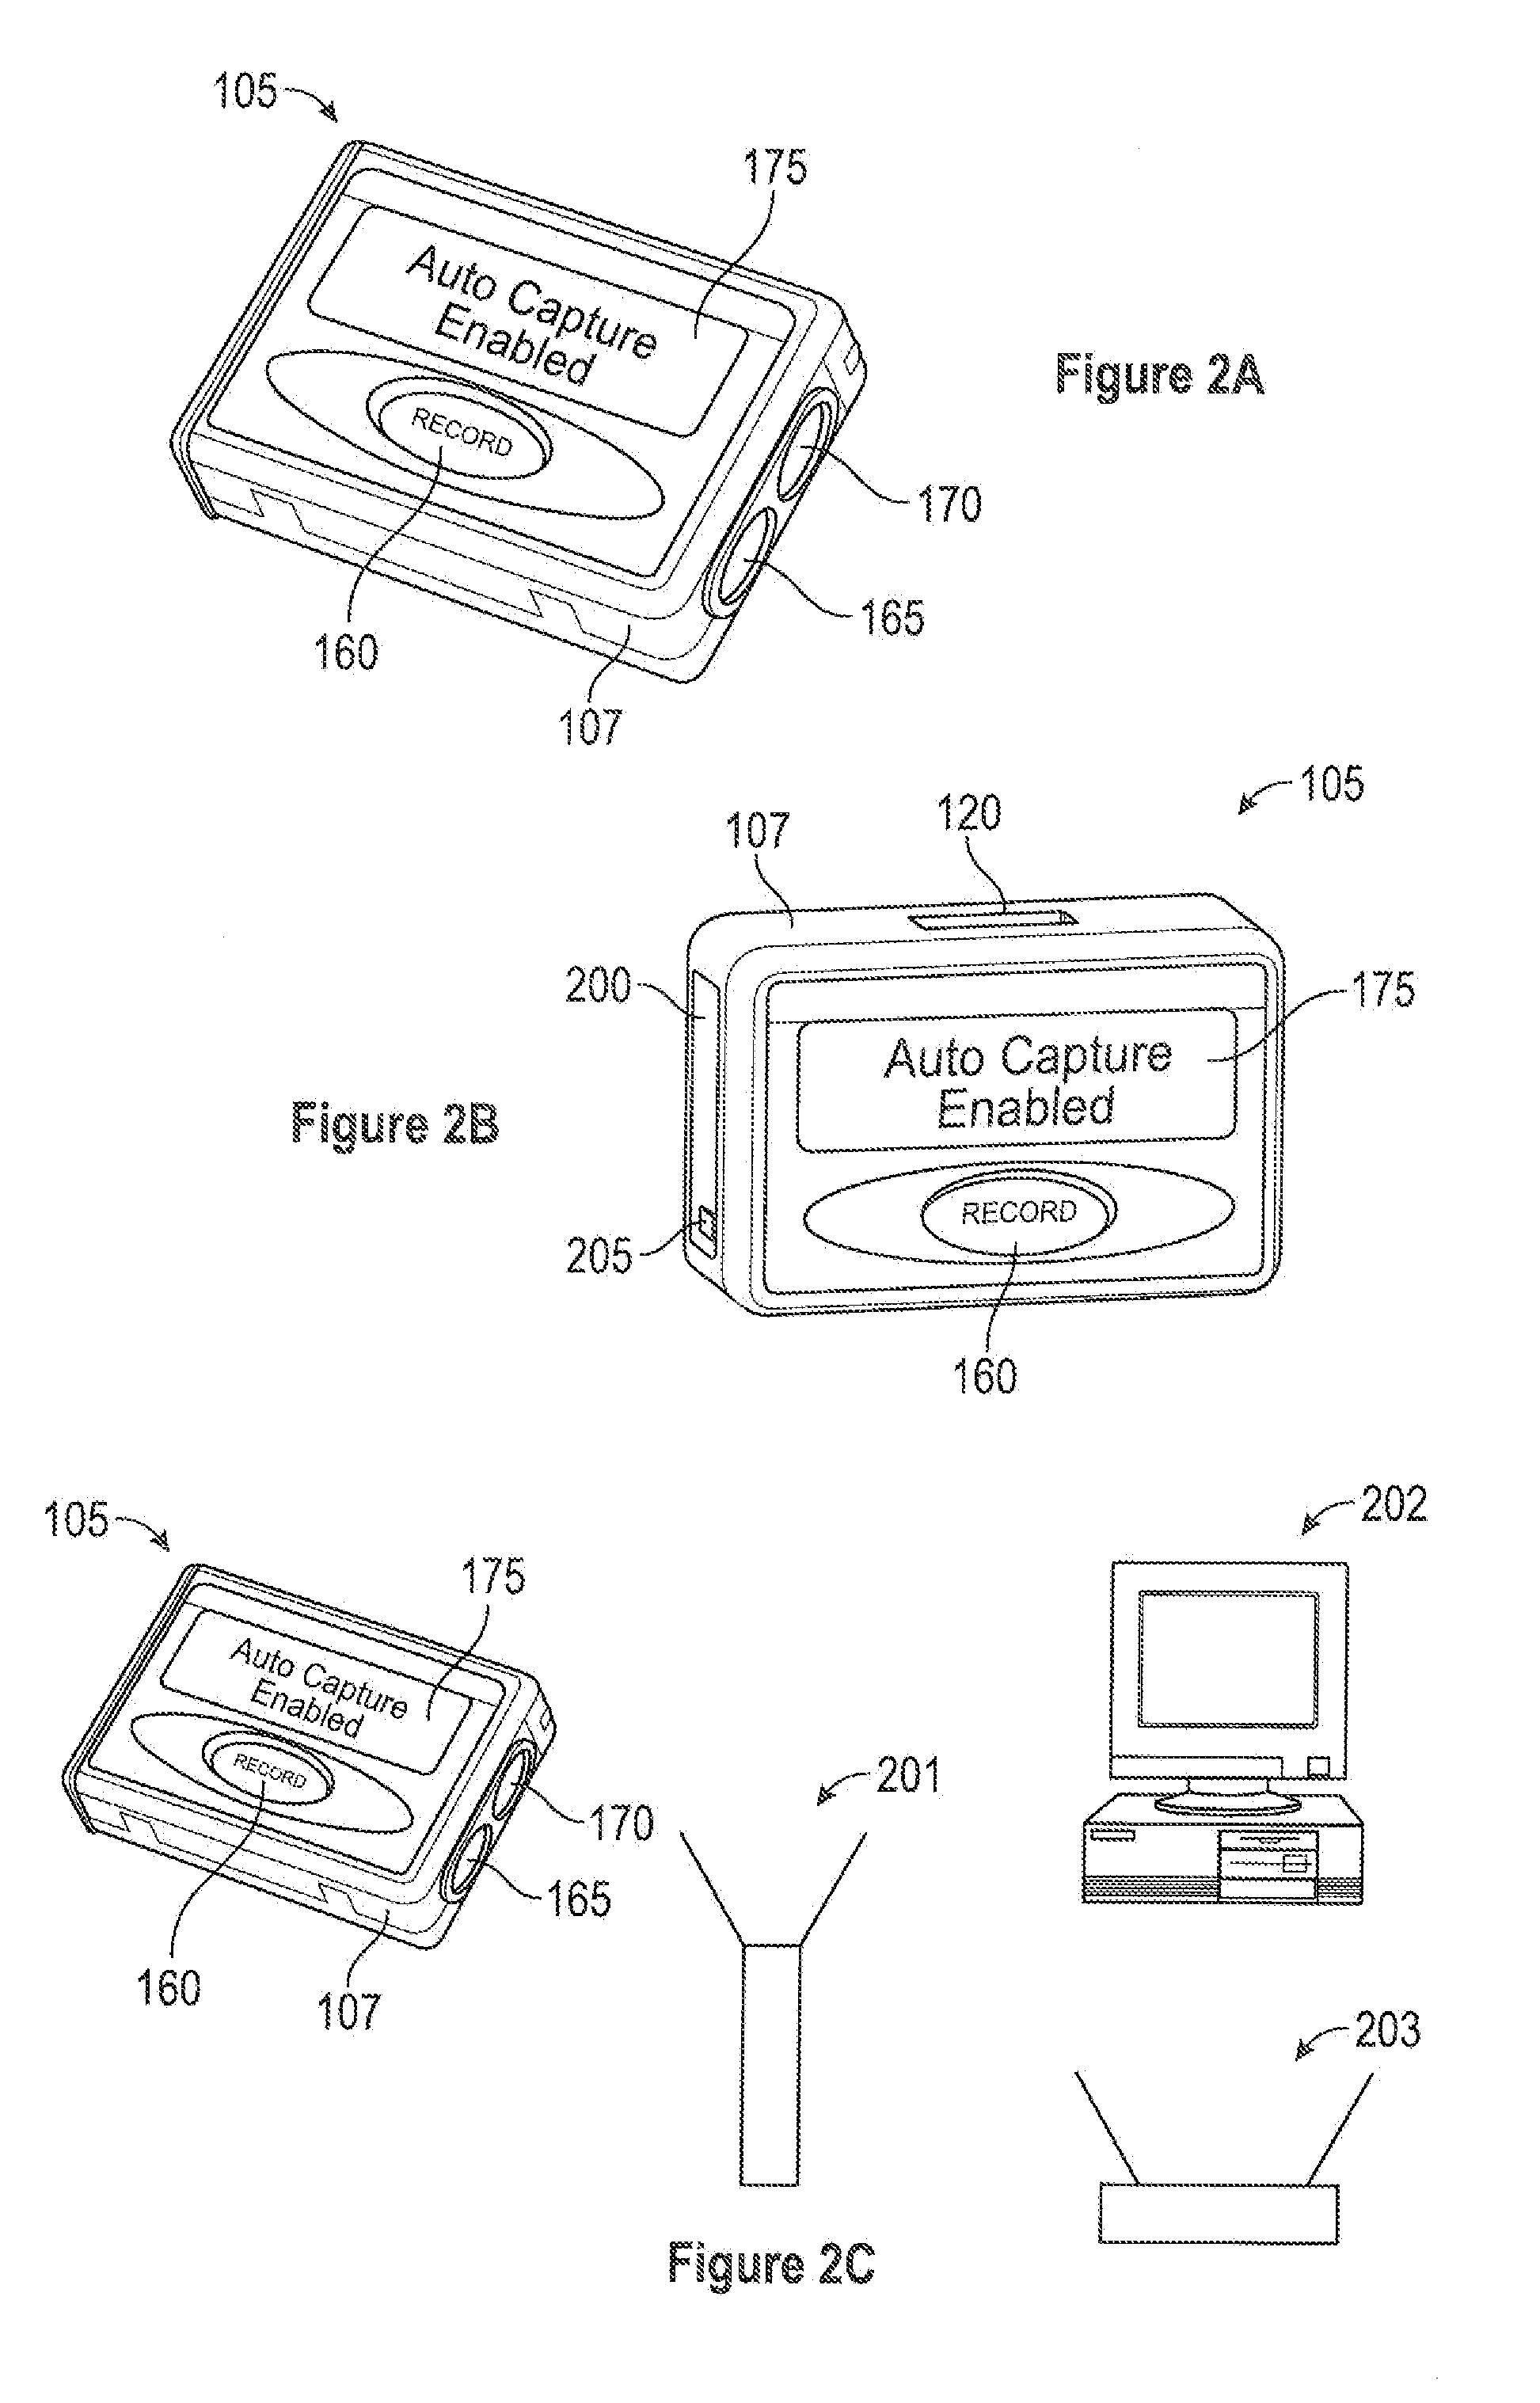 Systems and methods for interelectrode distance optimization in a retractable multi-use cardiac monitor